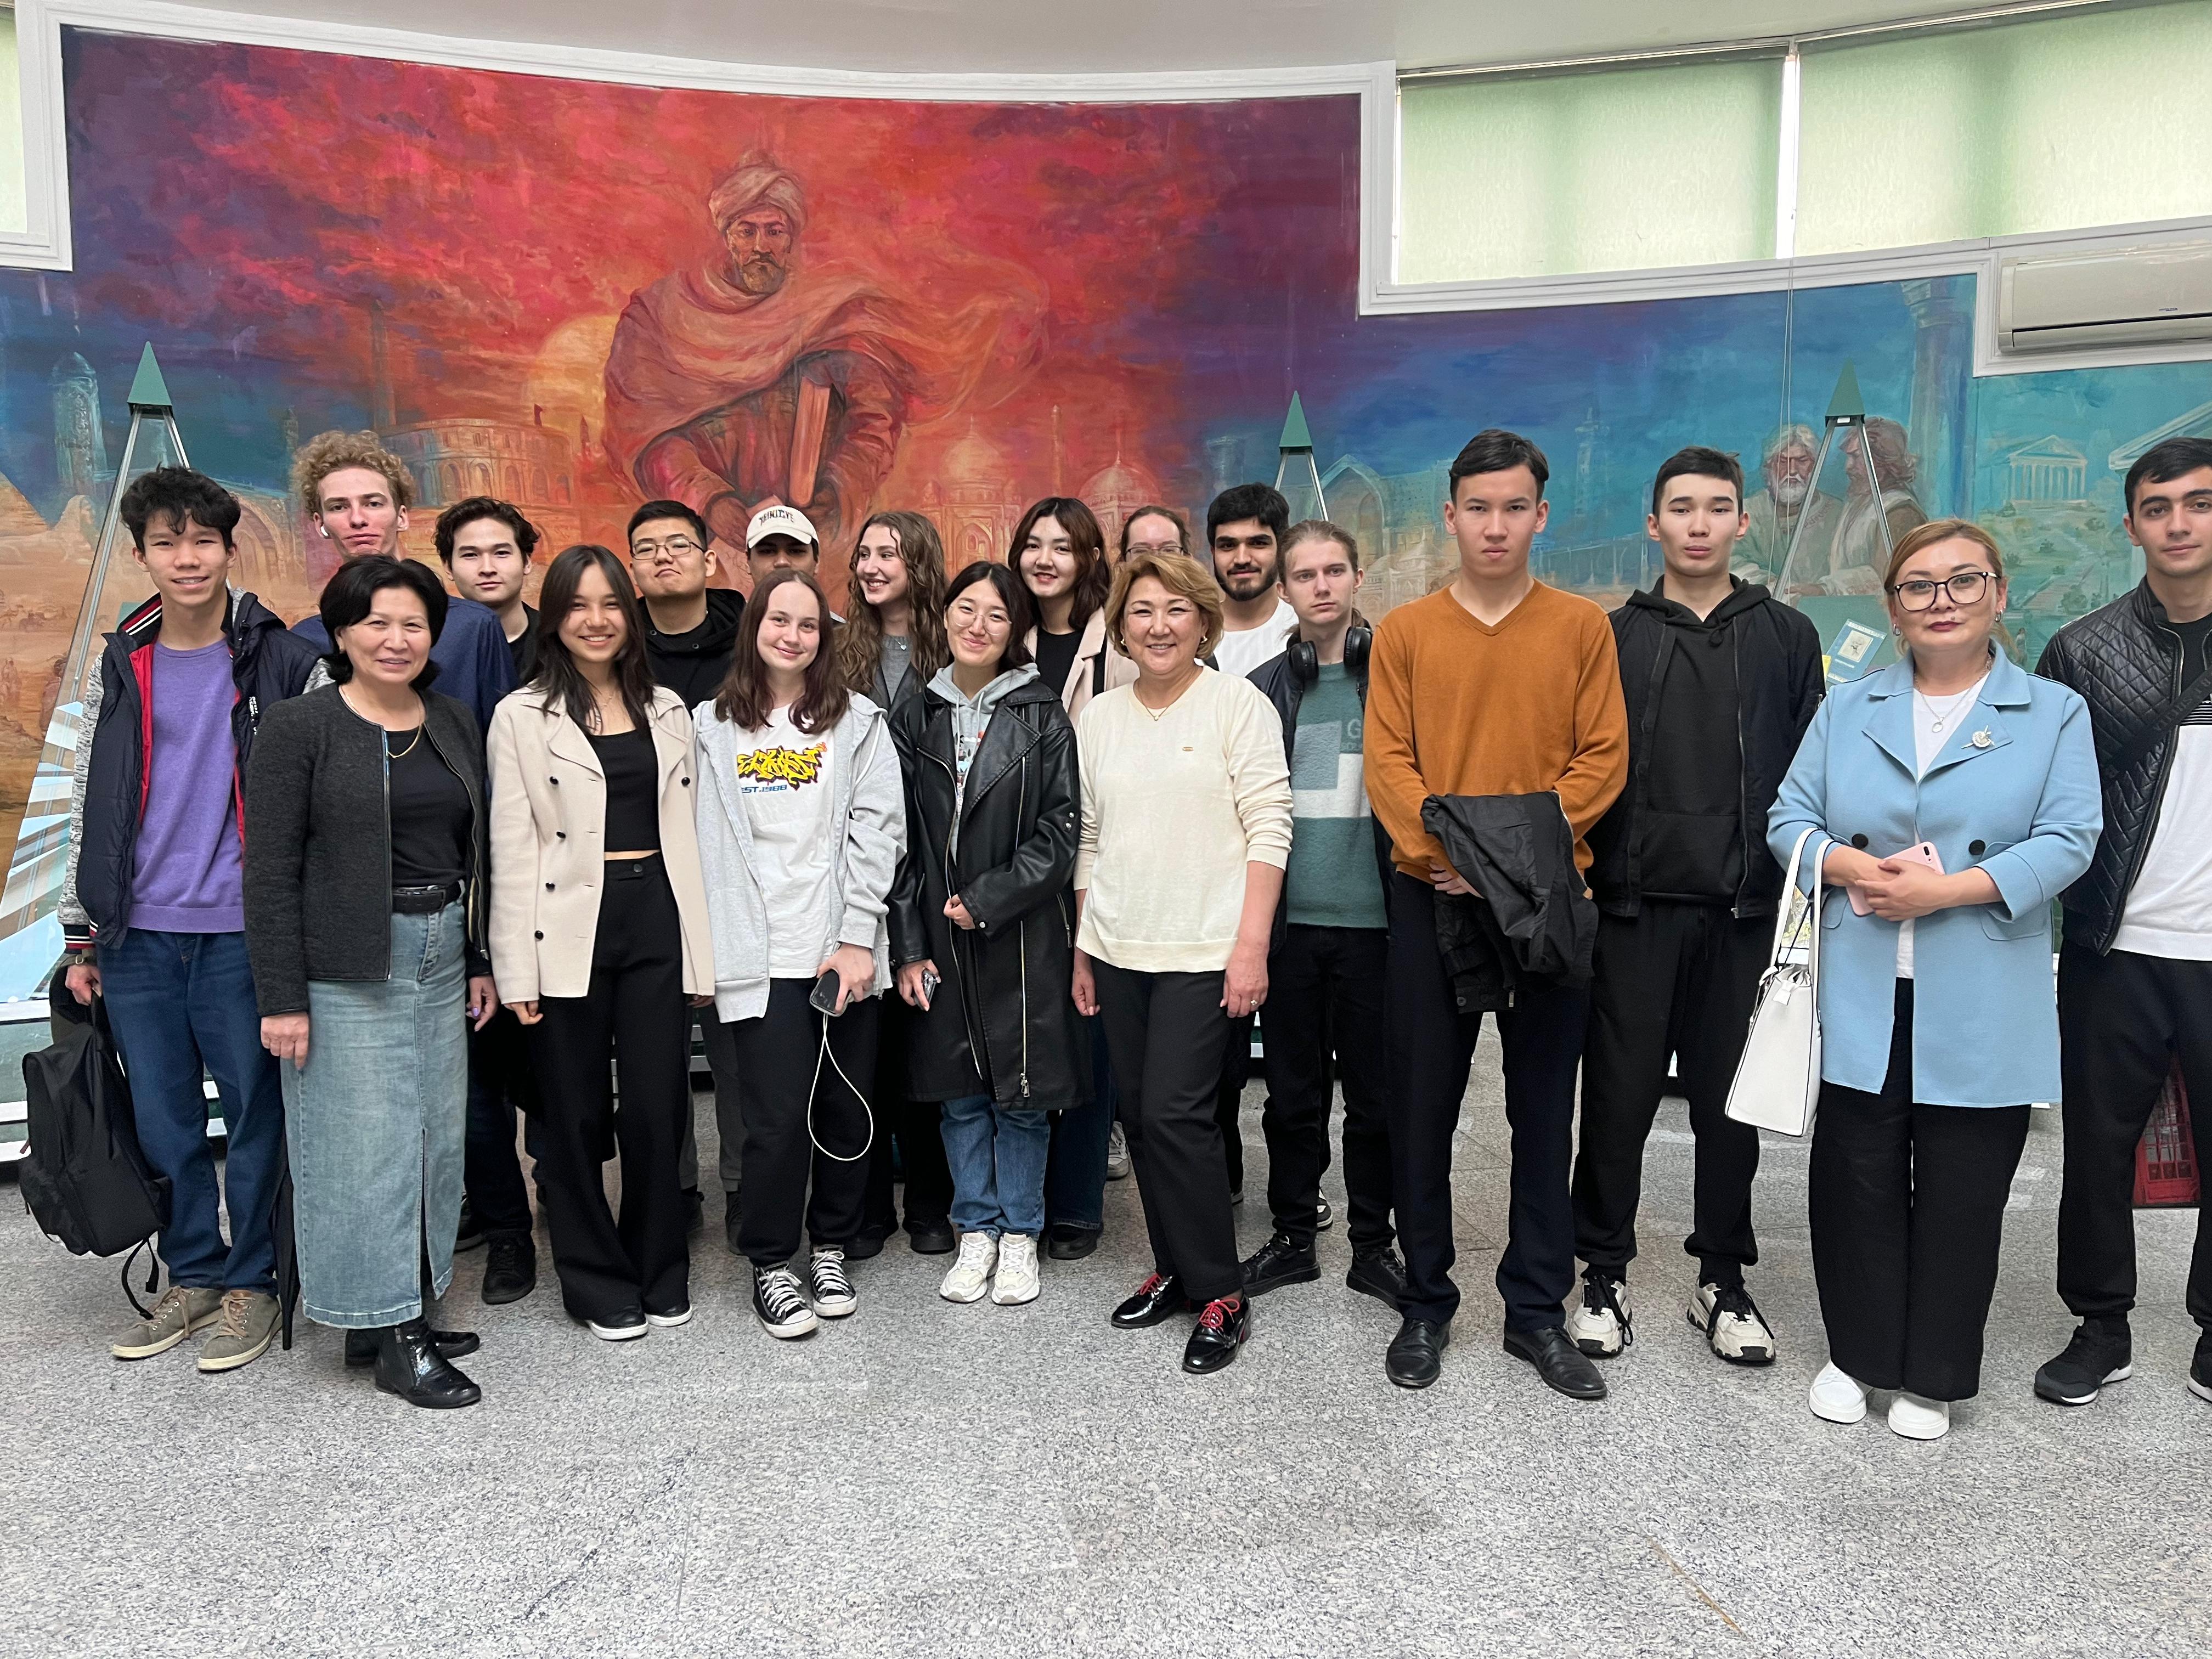 Within the framework of SDG 4 "Quality Education", 1st year students of the specialty "Computer Engineering" and "Computer Science" of the Russian department visited the museum of al-Farabi Kazakh National University